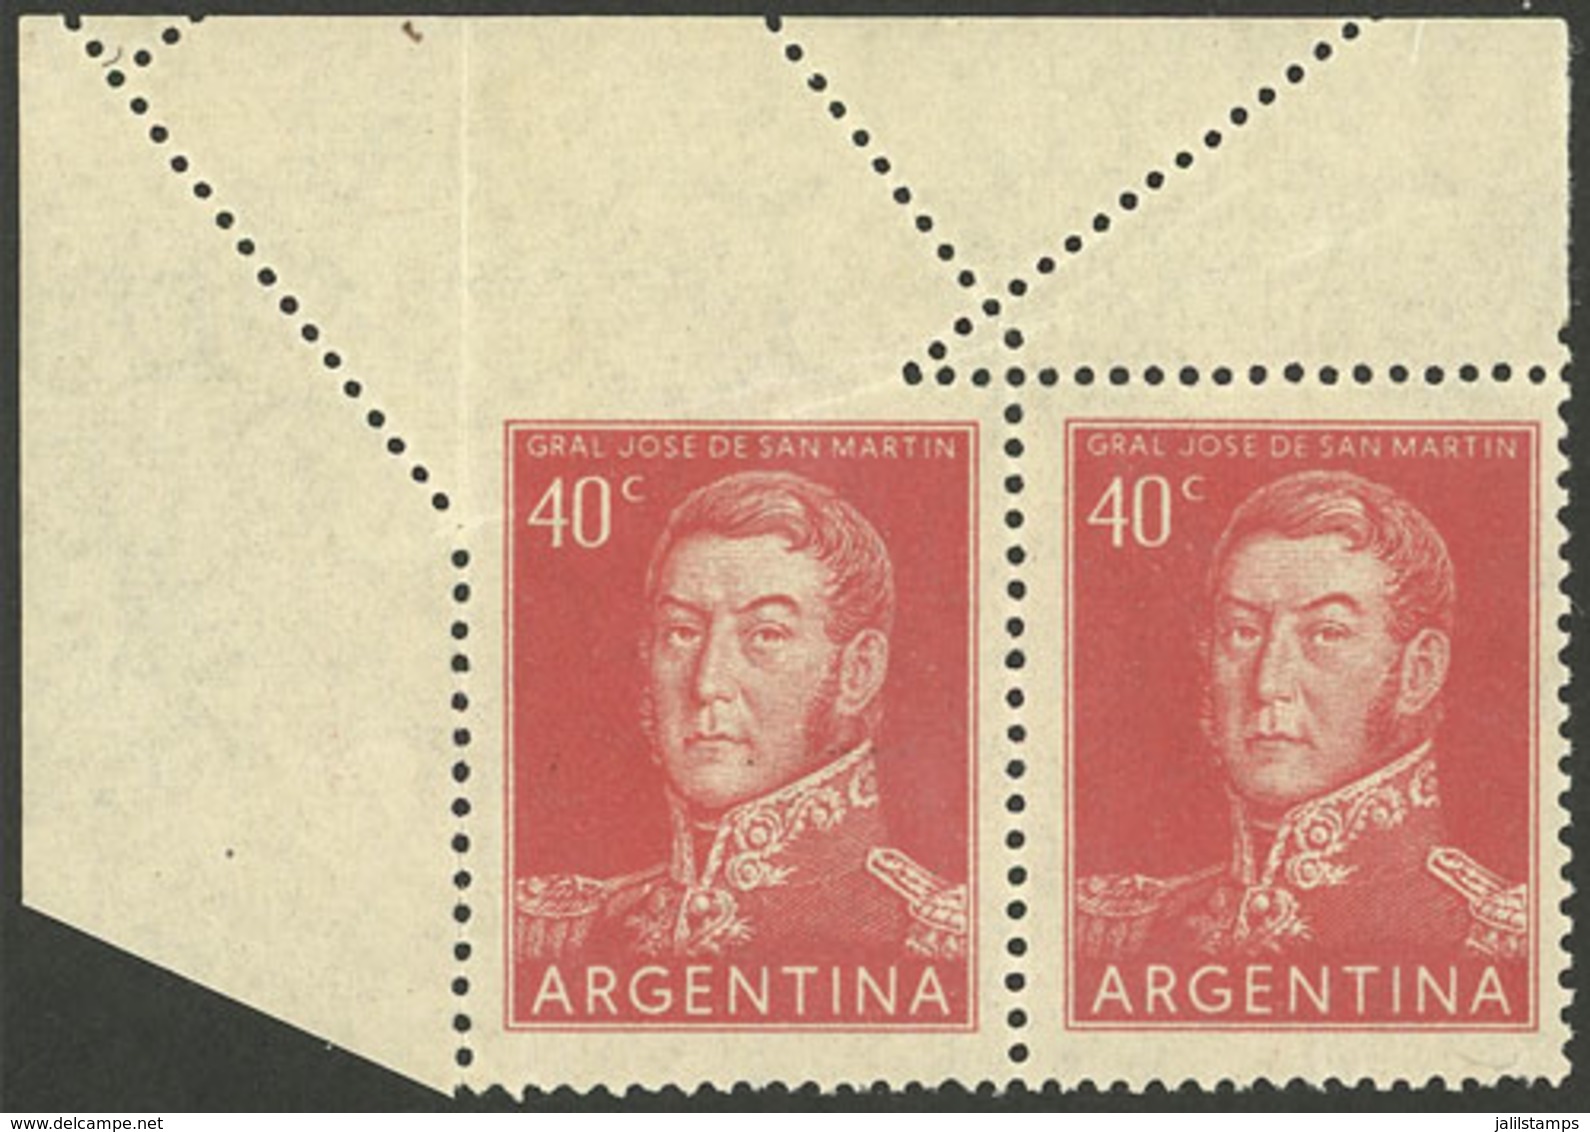 ARGENTINA: GJ.1041, Pair With Spectacular Diagonal Perforation Variety At Top! - Nuovi